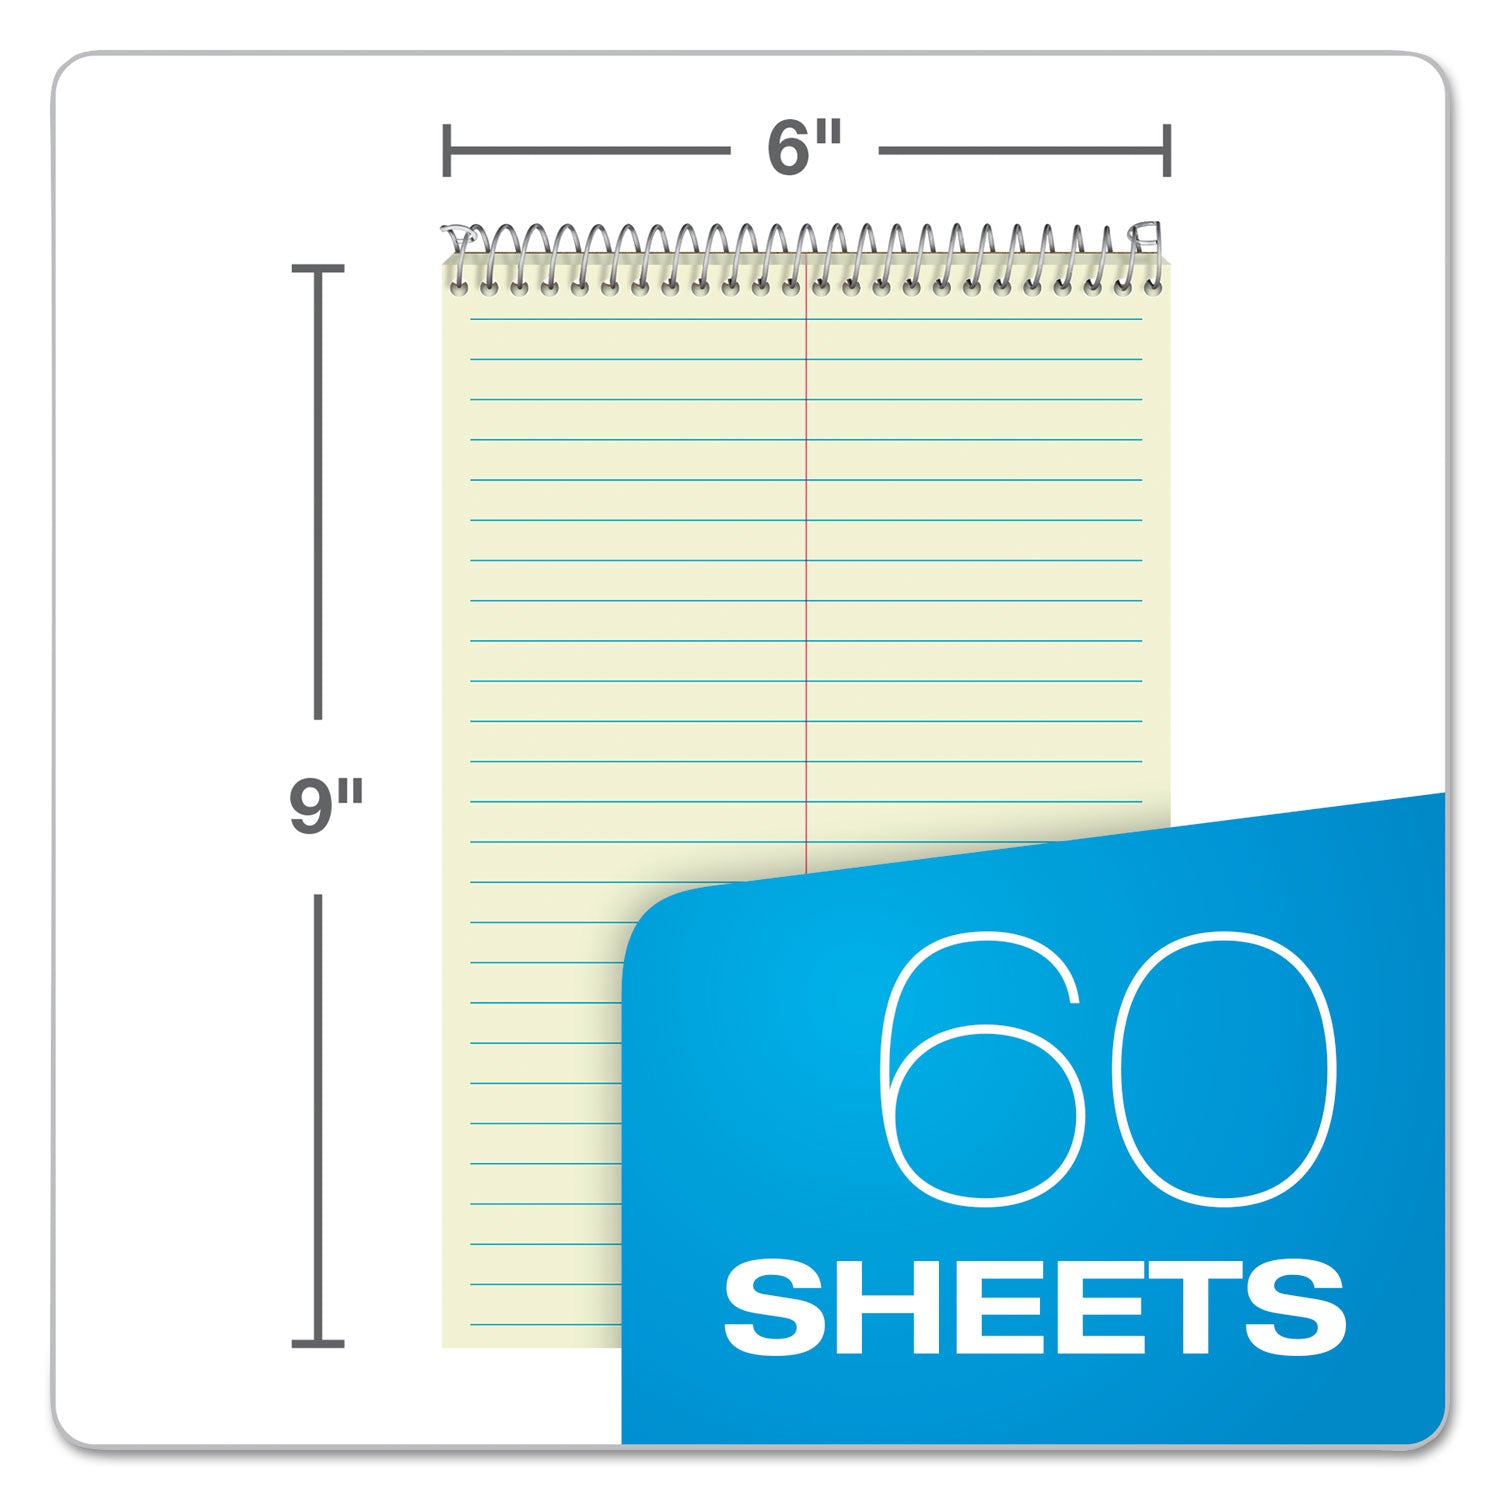 Steno Pads, Gregg Rule, Tan Cover, 60 Green-Tint 6 x 9 Sheets - 